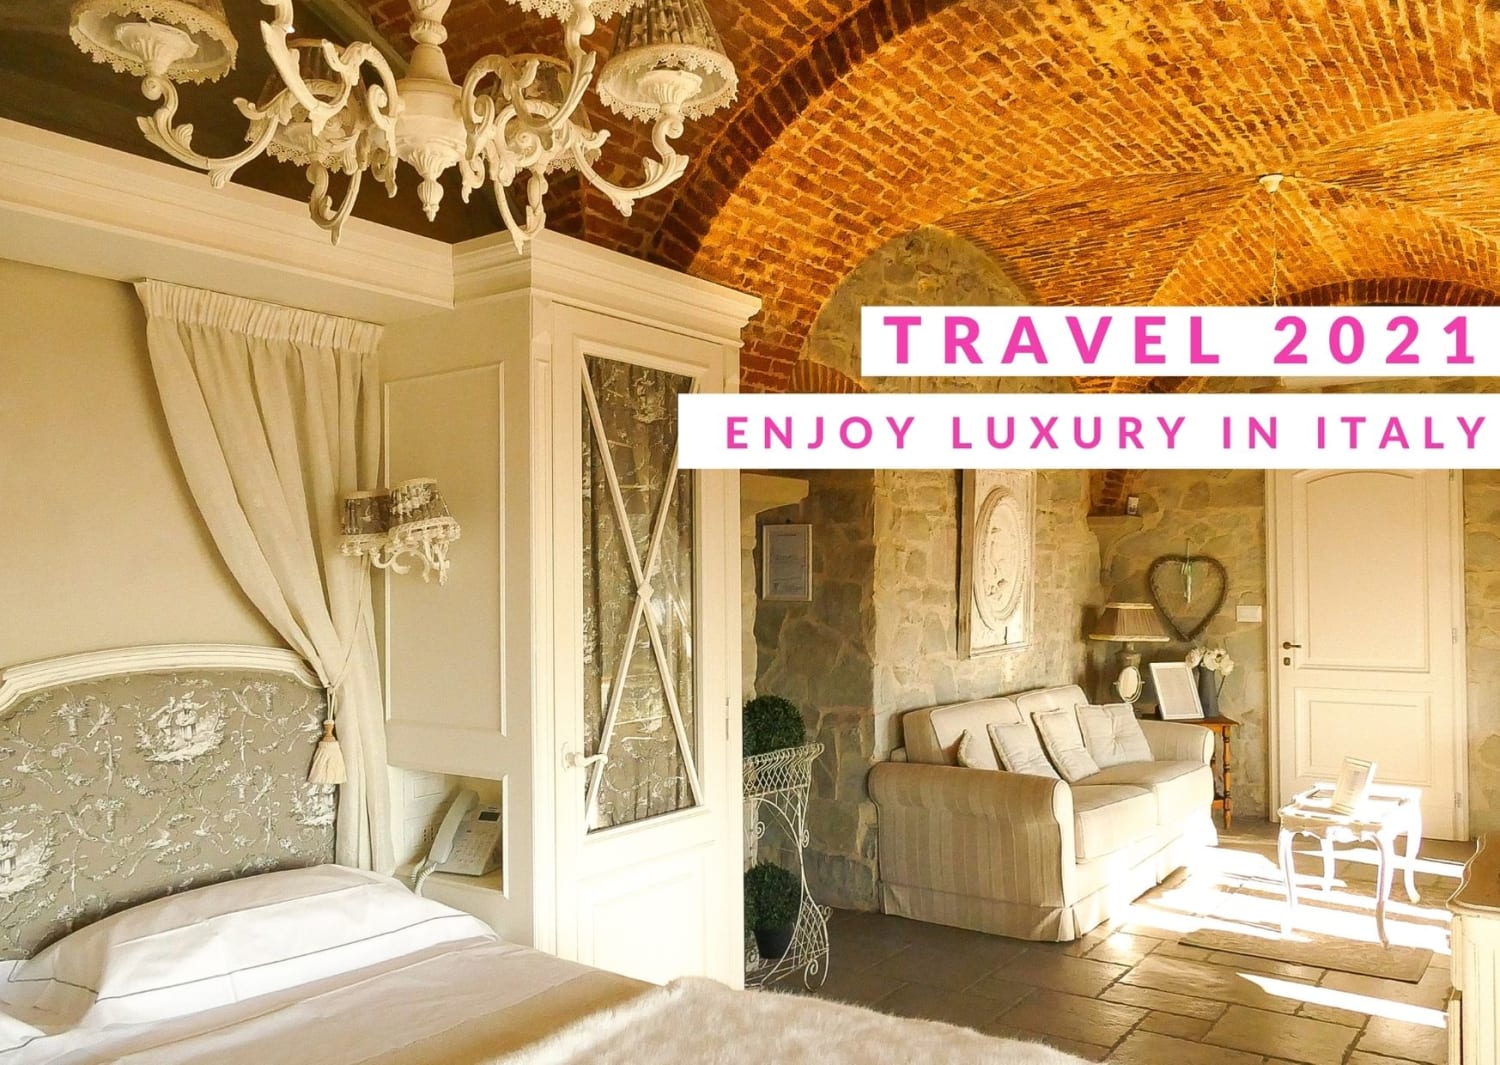 5 best luxury Boutique hotels in Italy - Best in Travel 2021